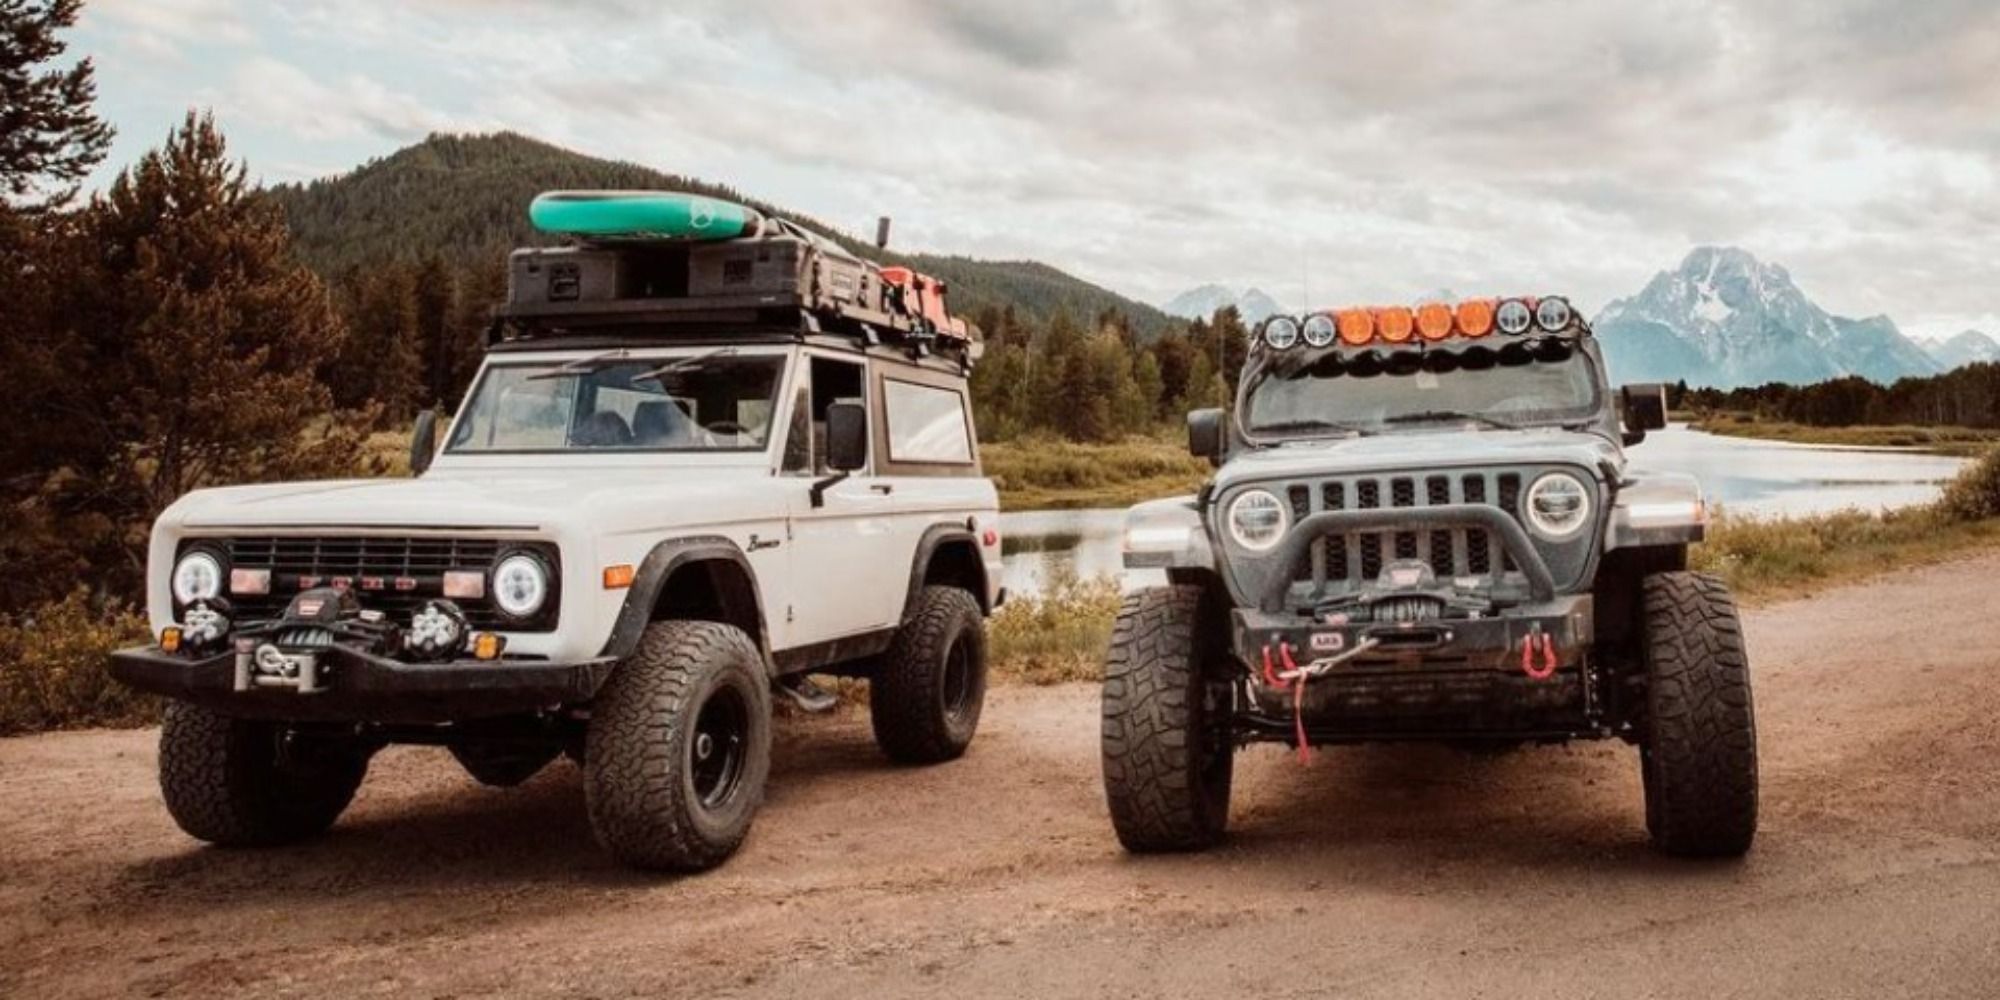 These Overland SUVs Are The Perfect OffRoad Adventure Vehicles